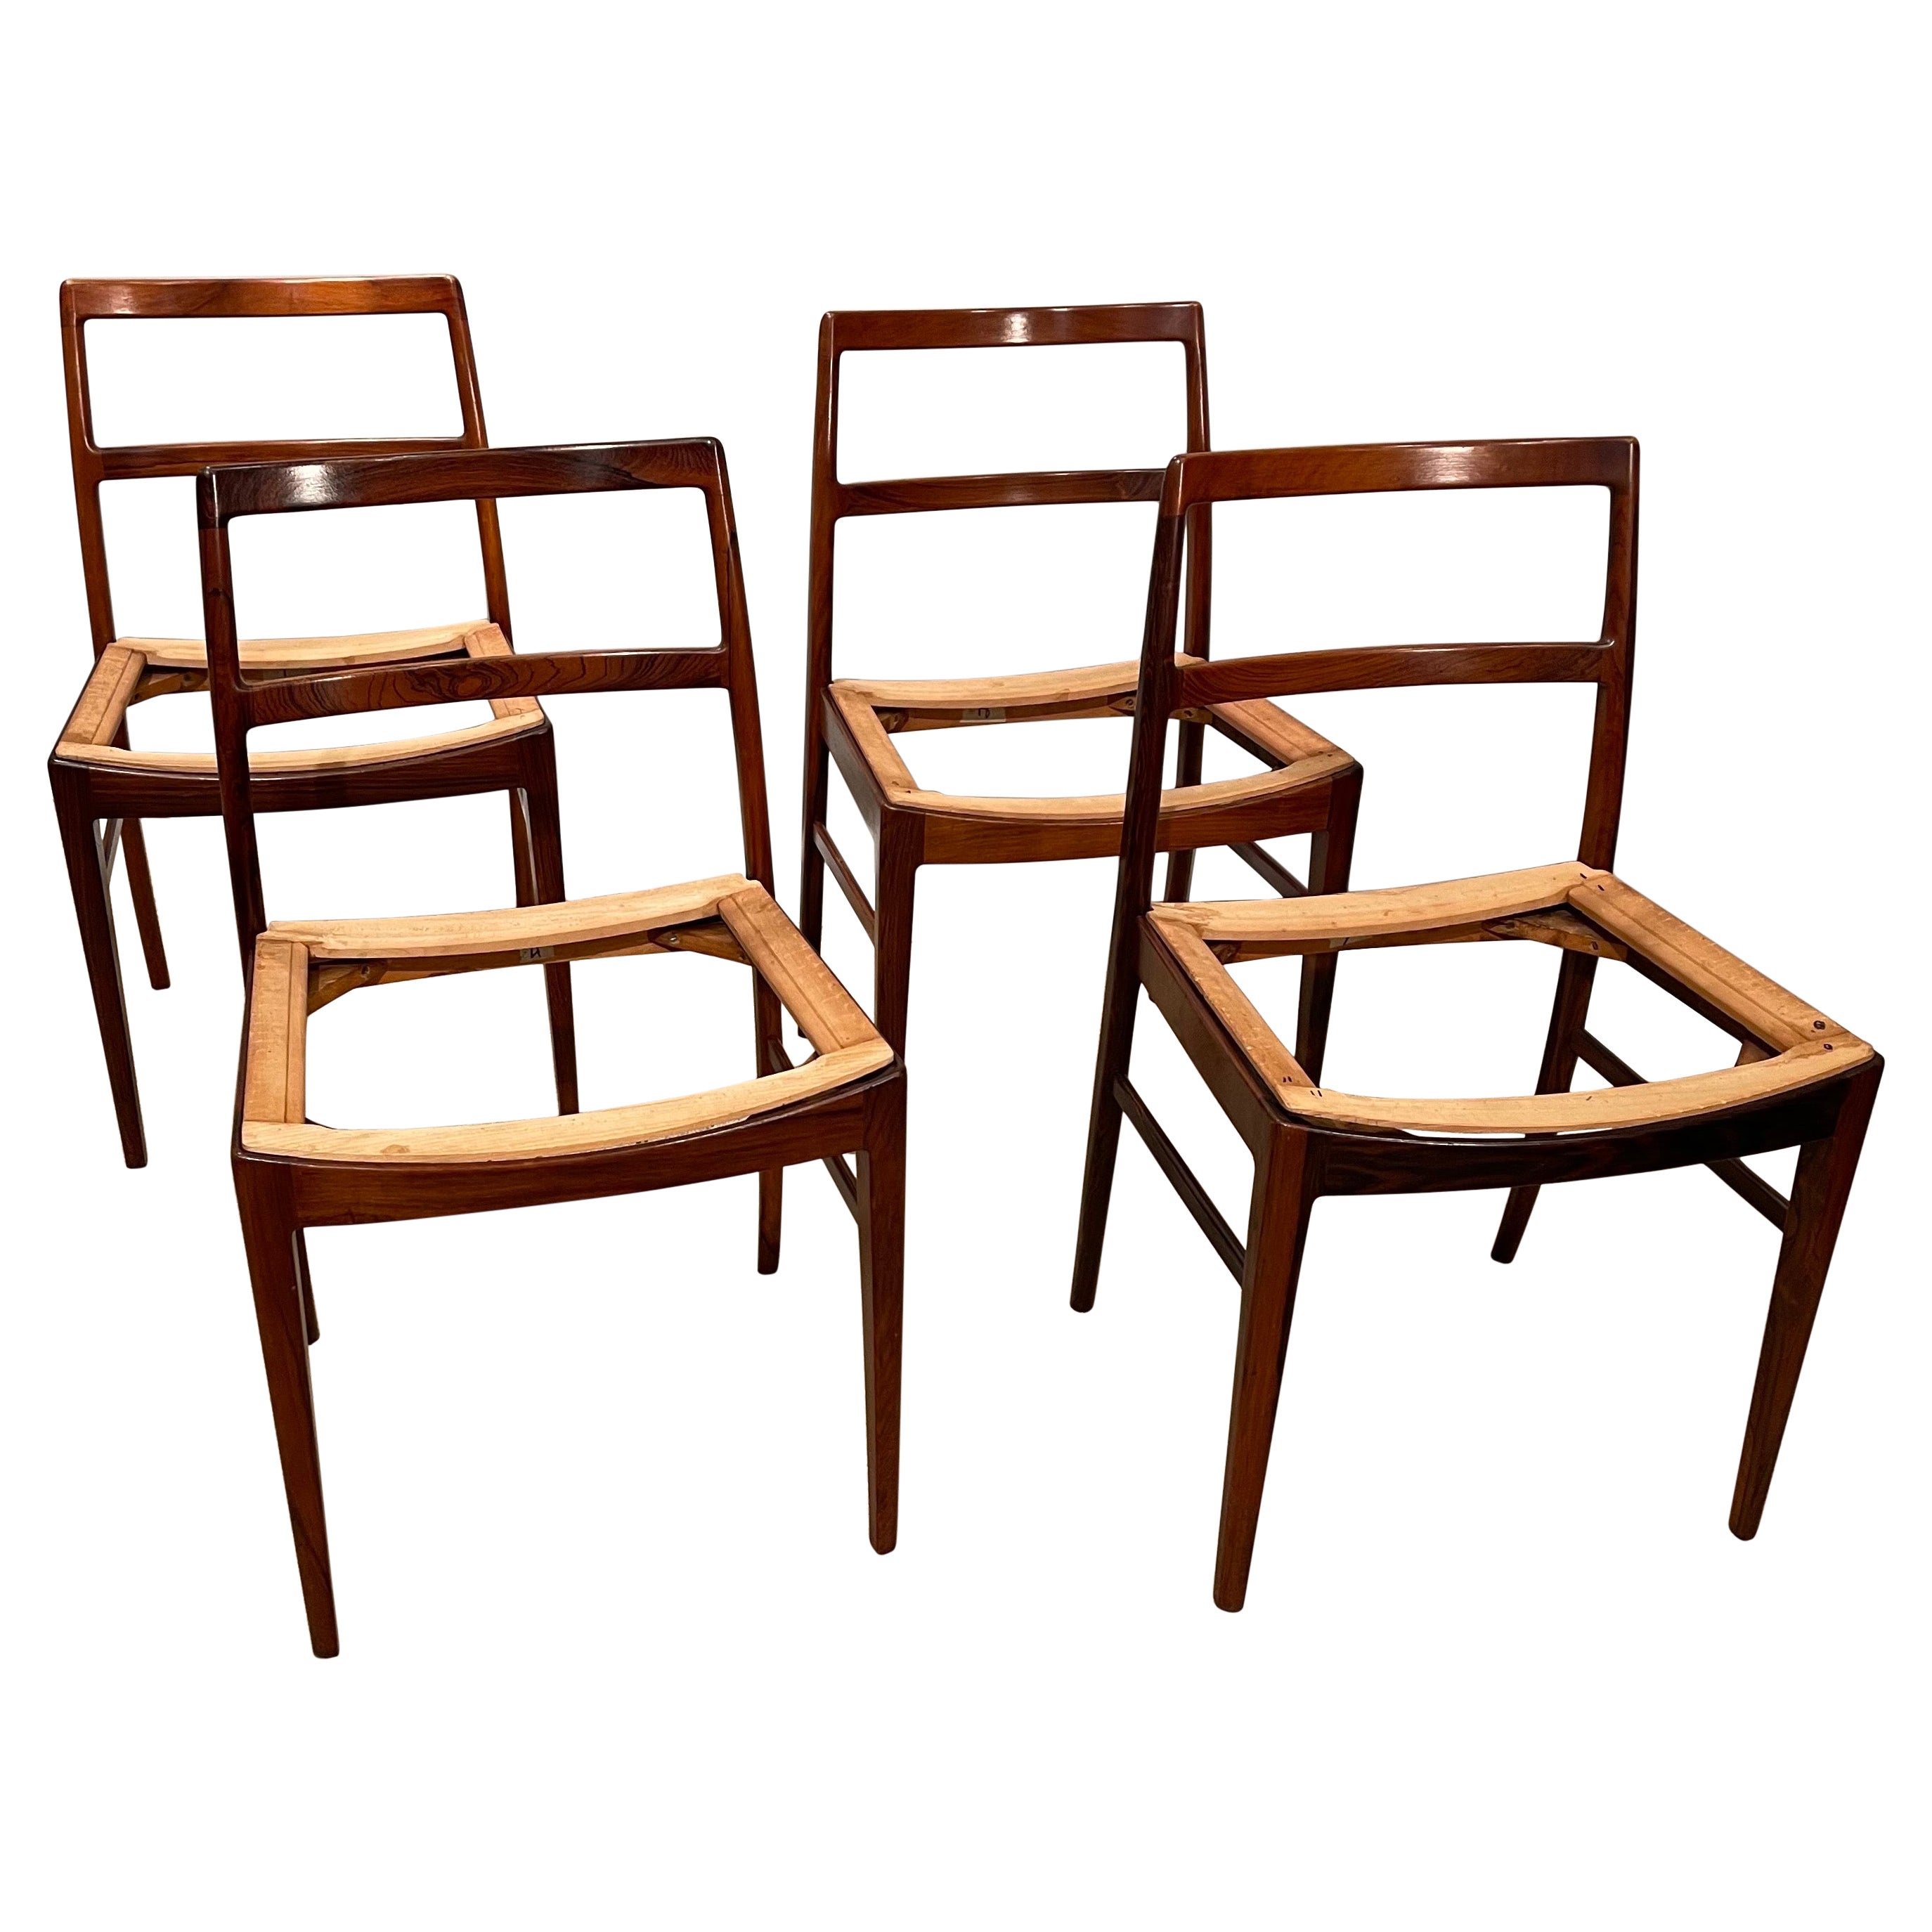 A set of 4 Mid-Century Modern rosewood side chairs with saddle slip seats
These chairs have wonderfully comfortable saddle seats 
frames tightened, with slip seats ready to upholstery. 
If you provide fabric, we can cover for $350 per seat.